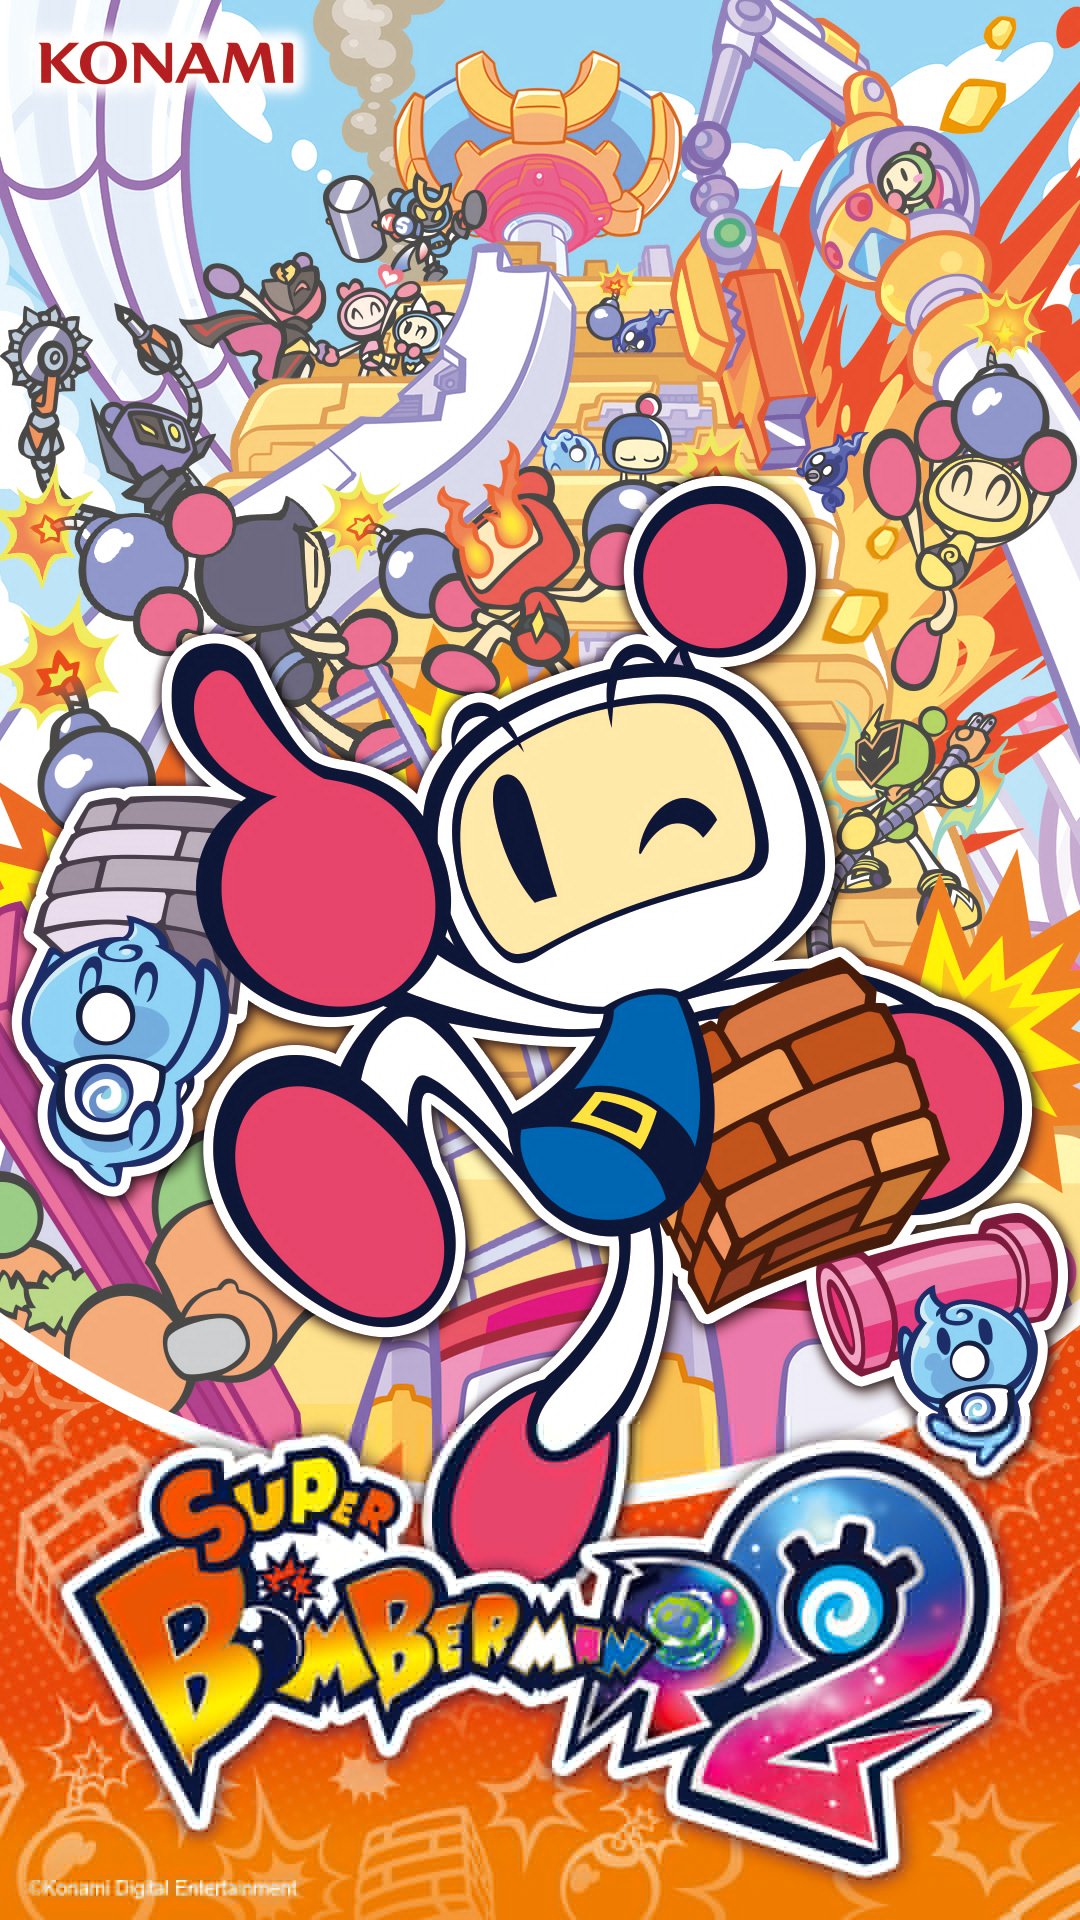 Bomberman official on its wallpaperwednesday ðï save this snazzy official sbr art wallpaper for your phone ð bomberman httpstcofcputjp